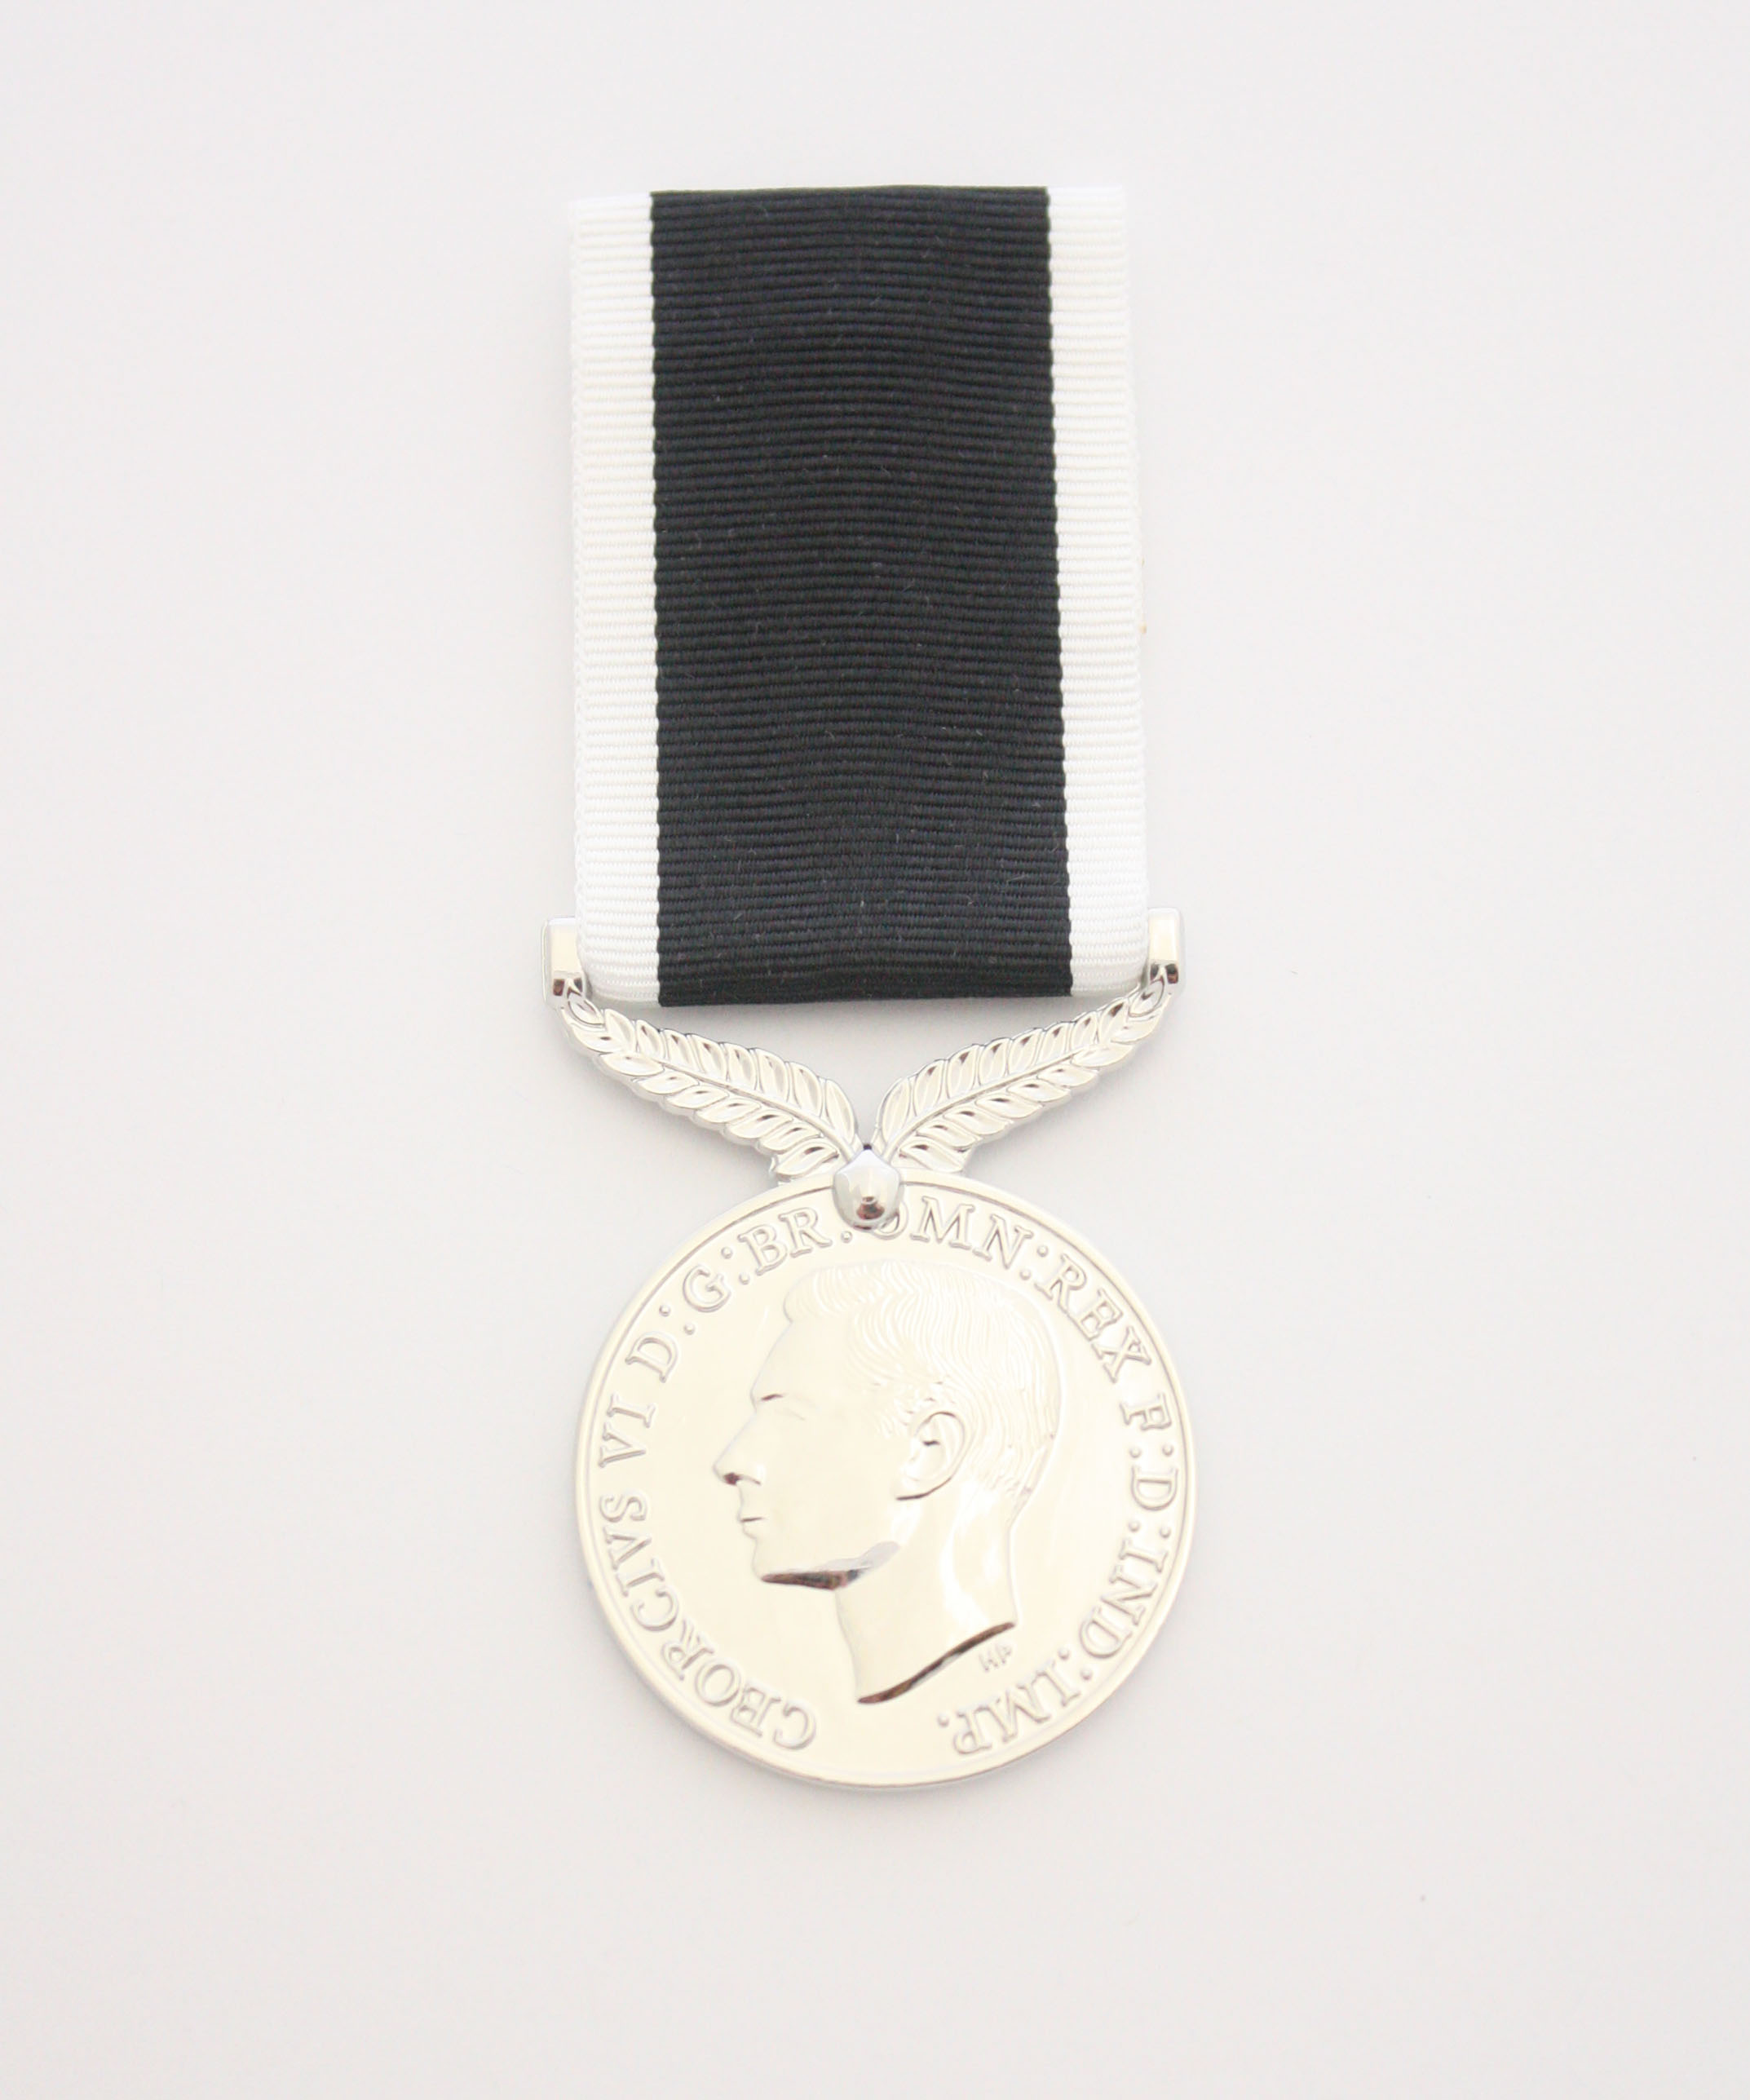 New Zealand Service Medal 1945